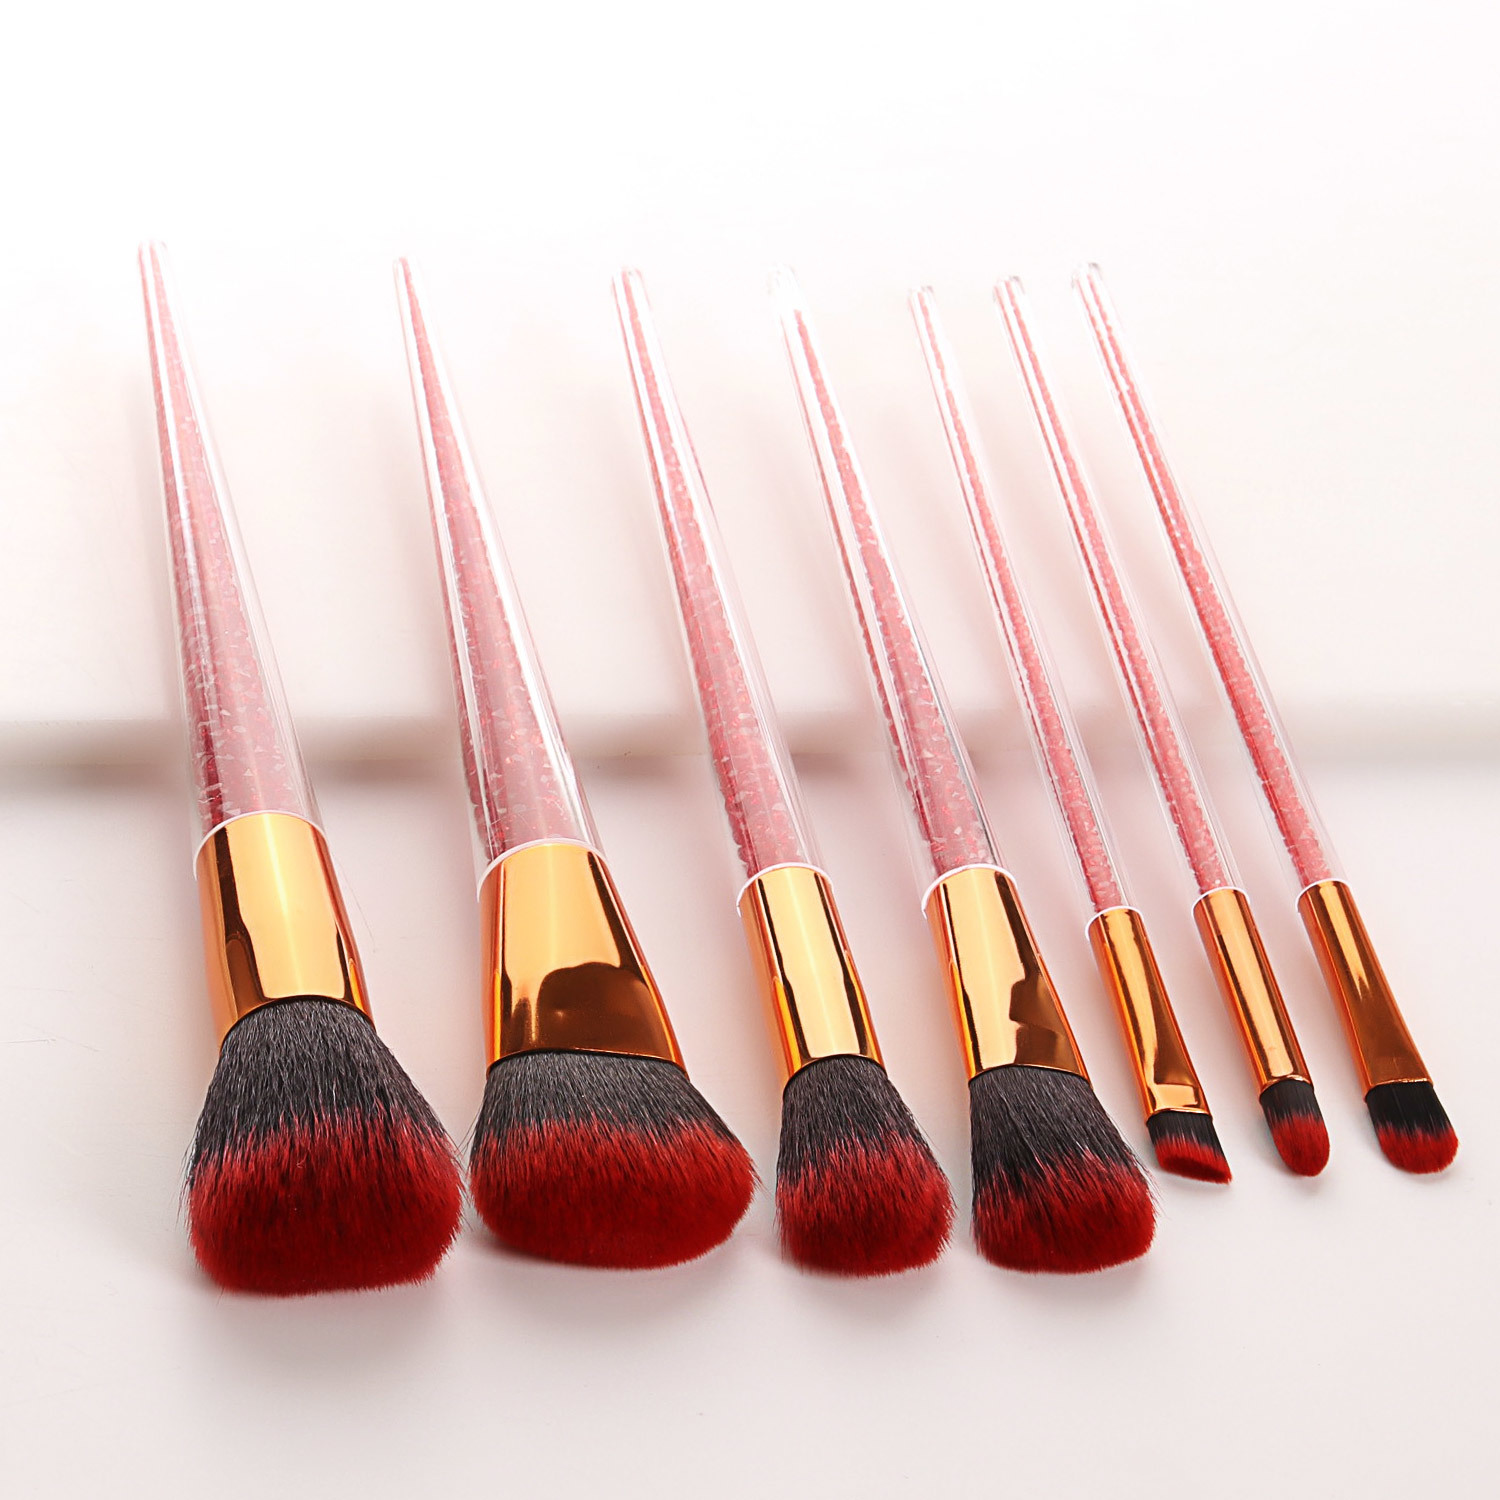 Cosmetic Makeup Brushes 7Pcs Rubber Handle with OPP Packaging